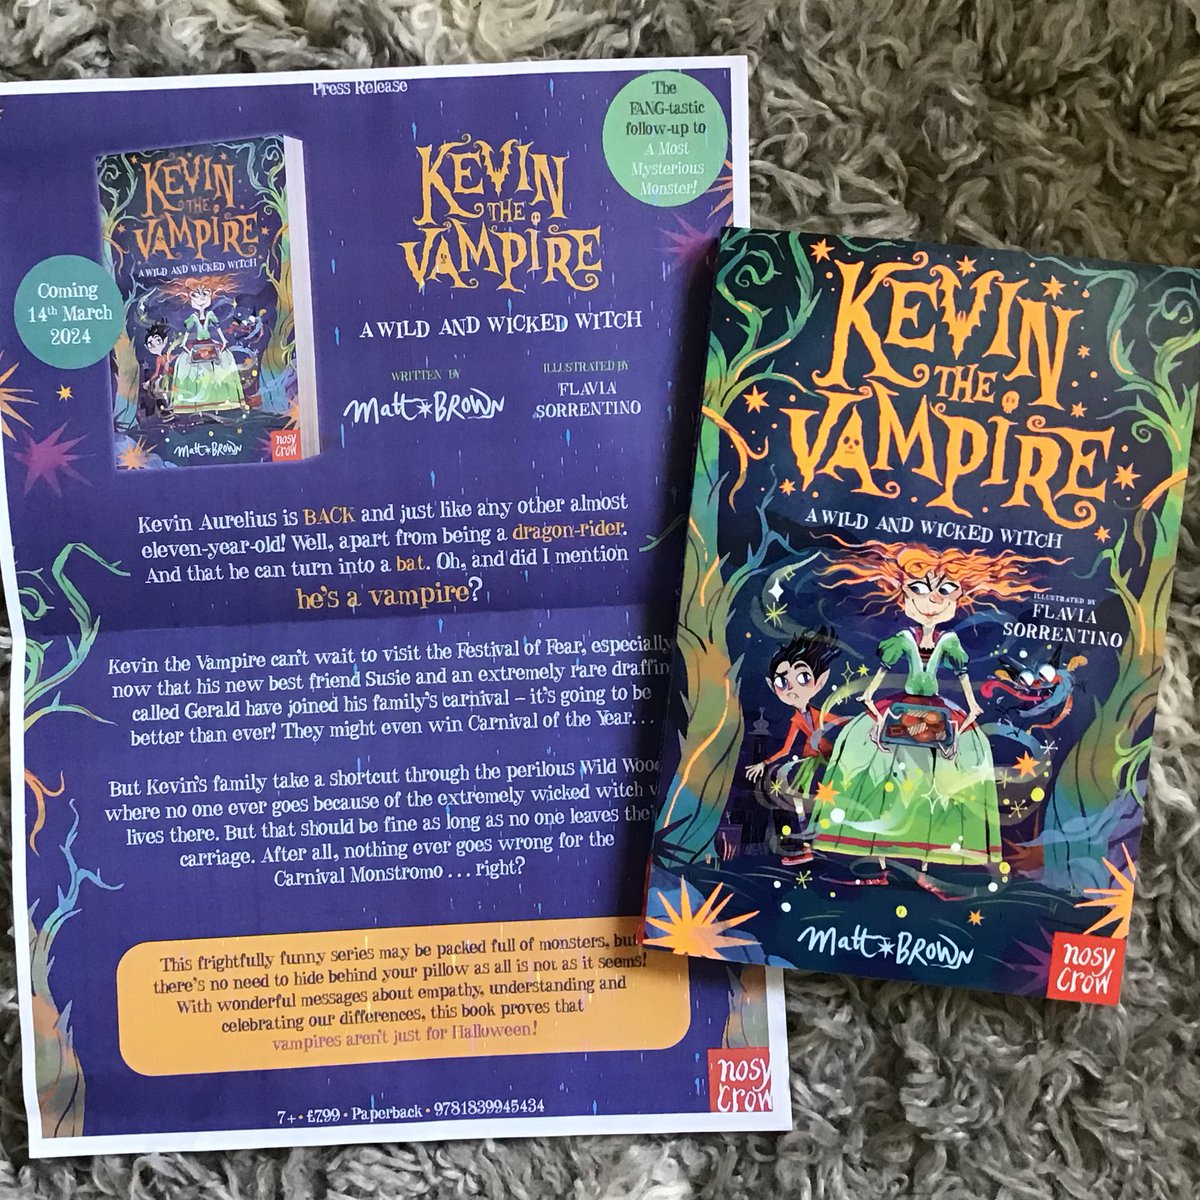 Huge thanks to @thesianpages @NosyCrow for this fabulous sequel - #KevinTheVampire: A Wild And Wicked Witch by @mattbrownauthor, illustrated by @flaviasorr. Enormously looking forward to visiting the Festival of Fear alongside the Carnival Monstroso! Out 14/03 for 7+ readers. 🧛🏻